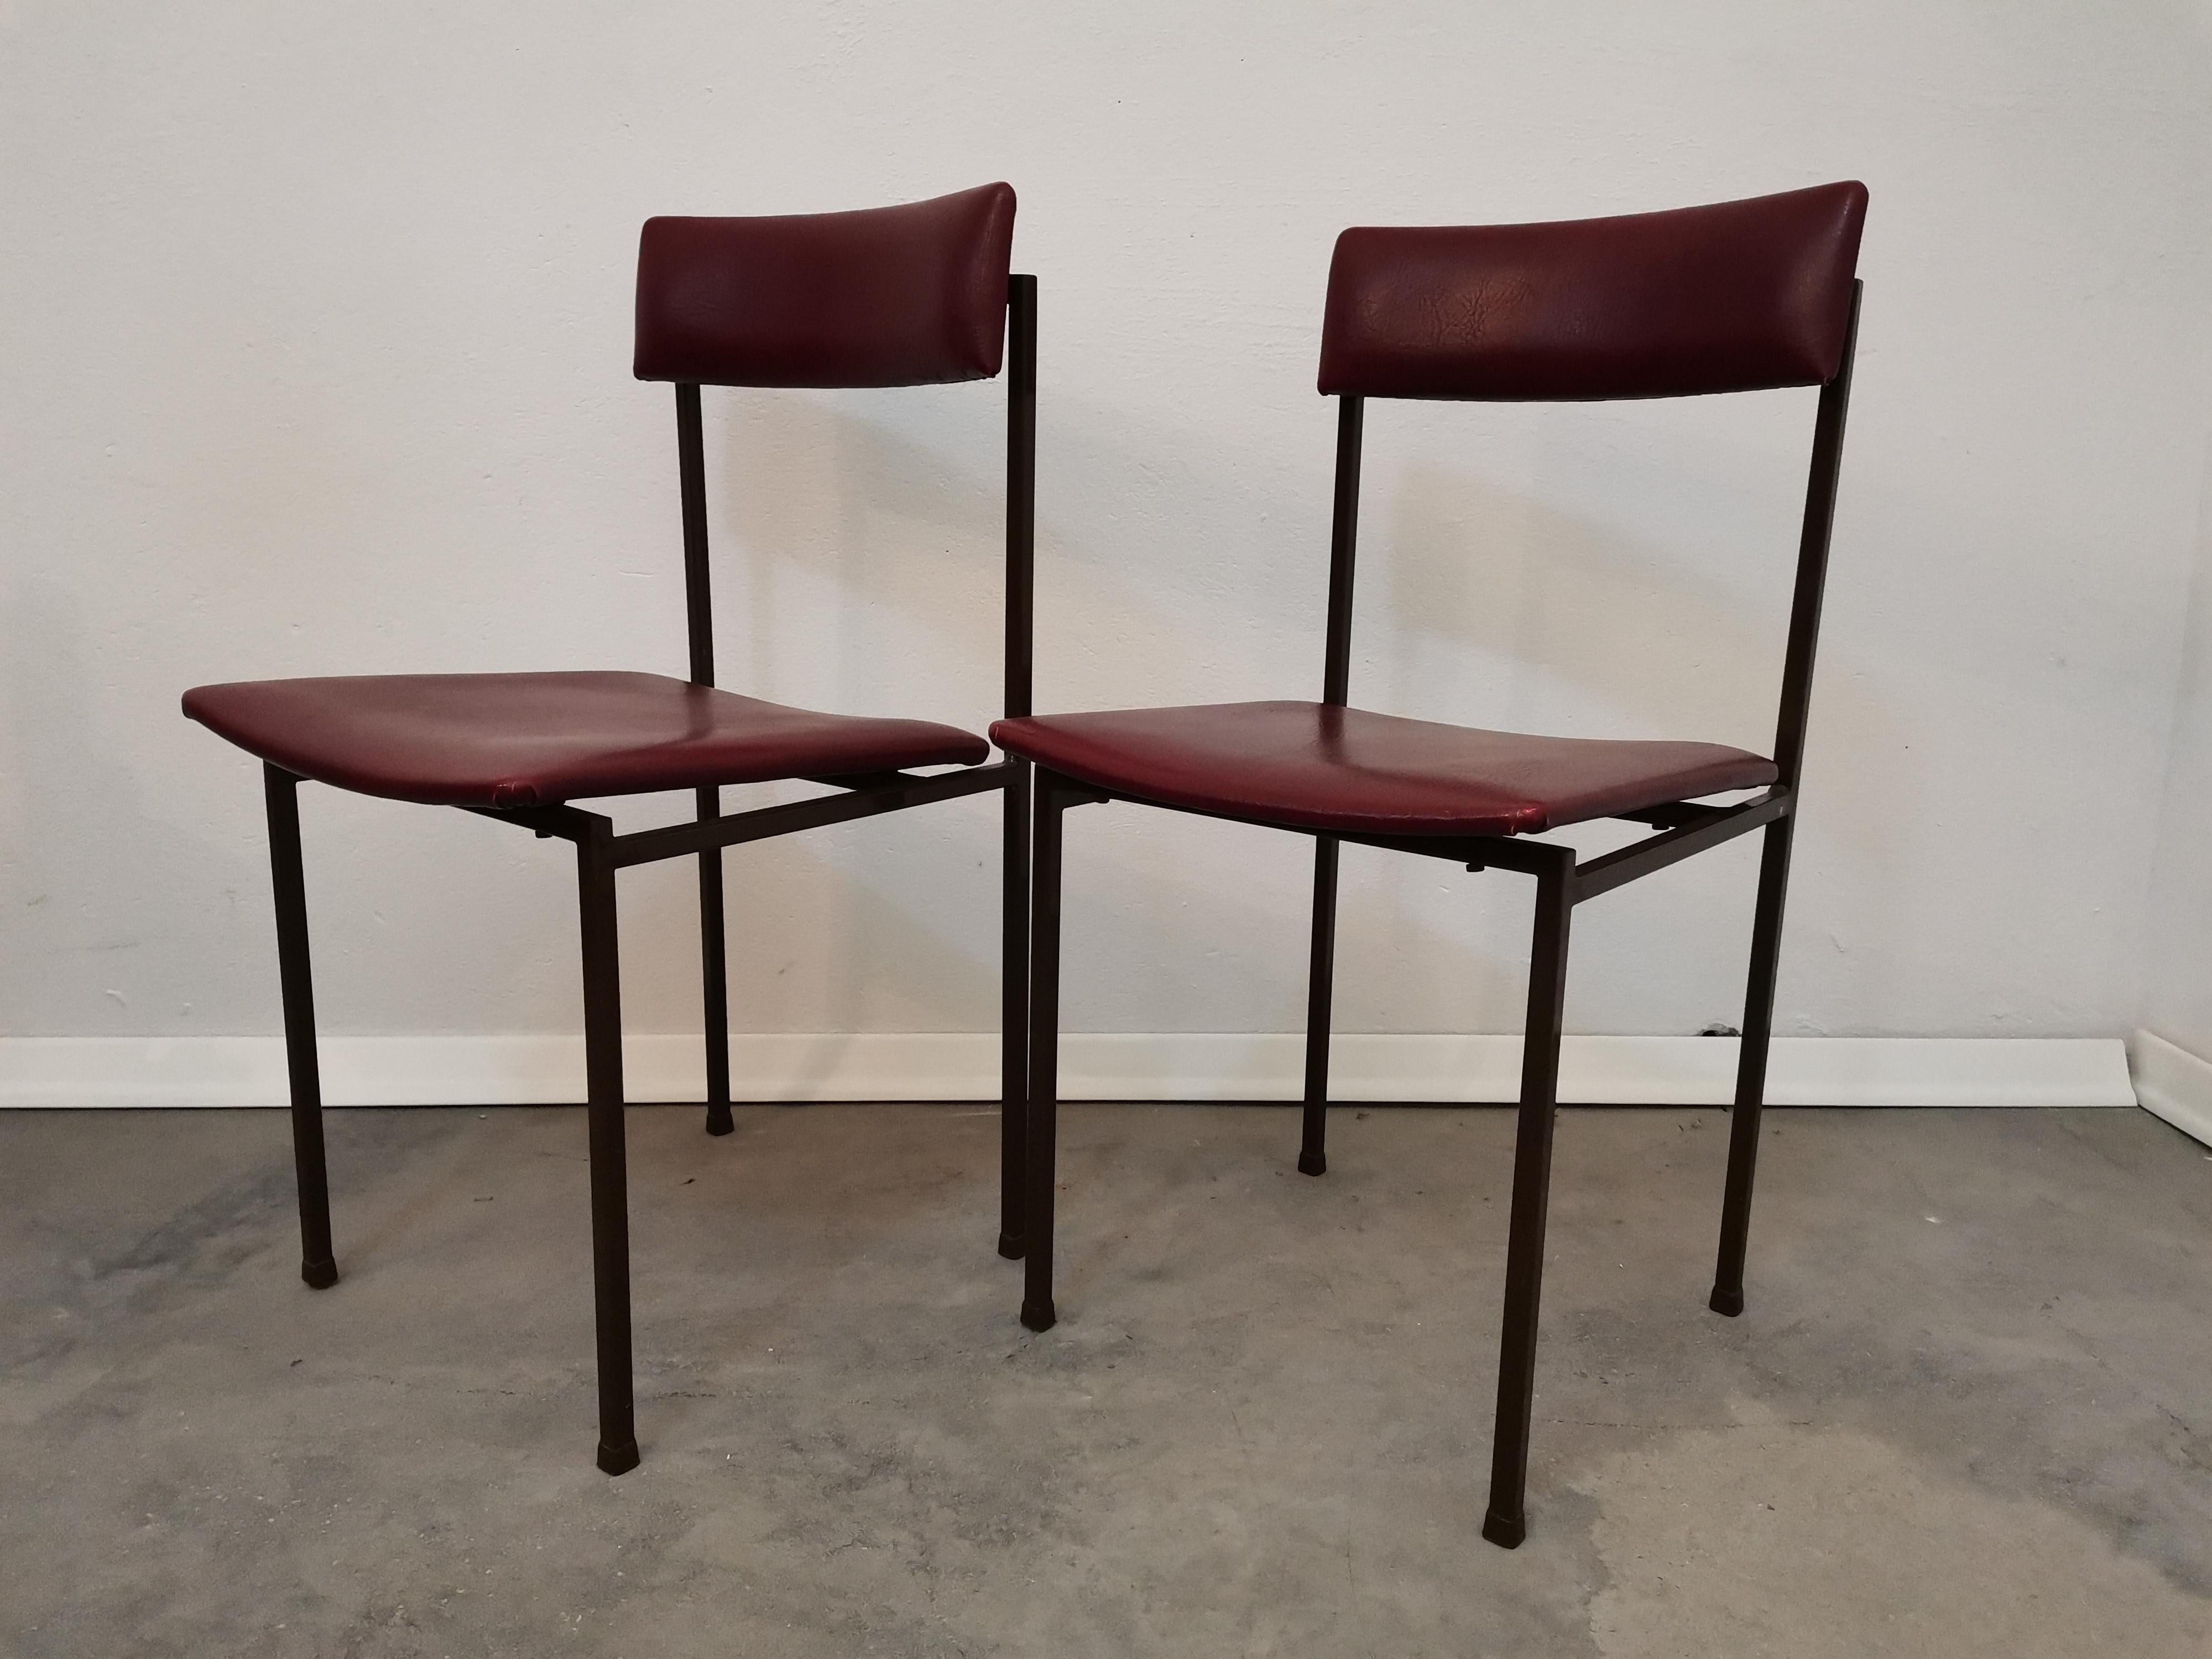 Material: Plywood, faux leather, metal

This beautiful chair is perfect example of minimalistic mid-century design. Solid metal frame and plywood covered win dark red faux leather bring elegant esthetics to your home or office.

Producer: Stol